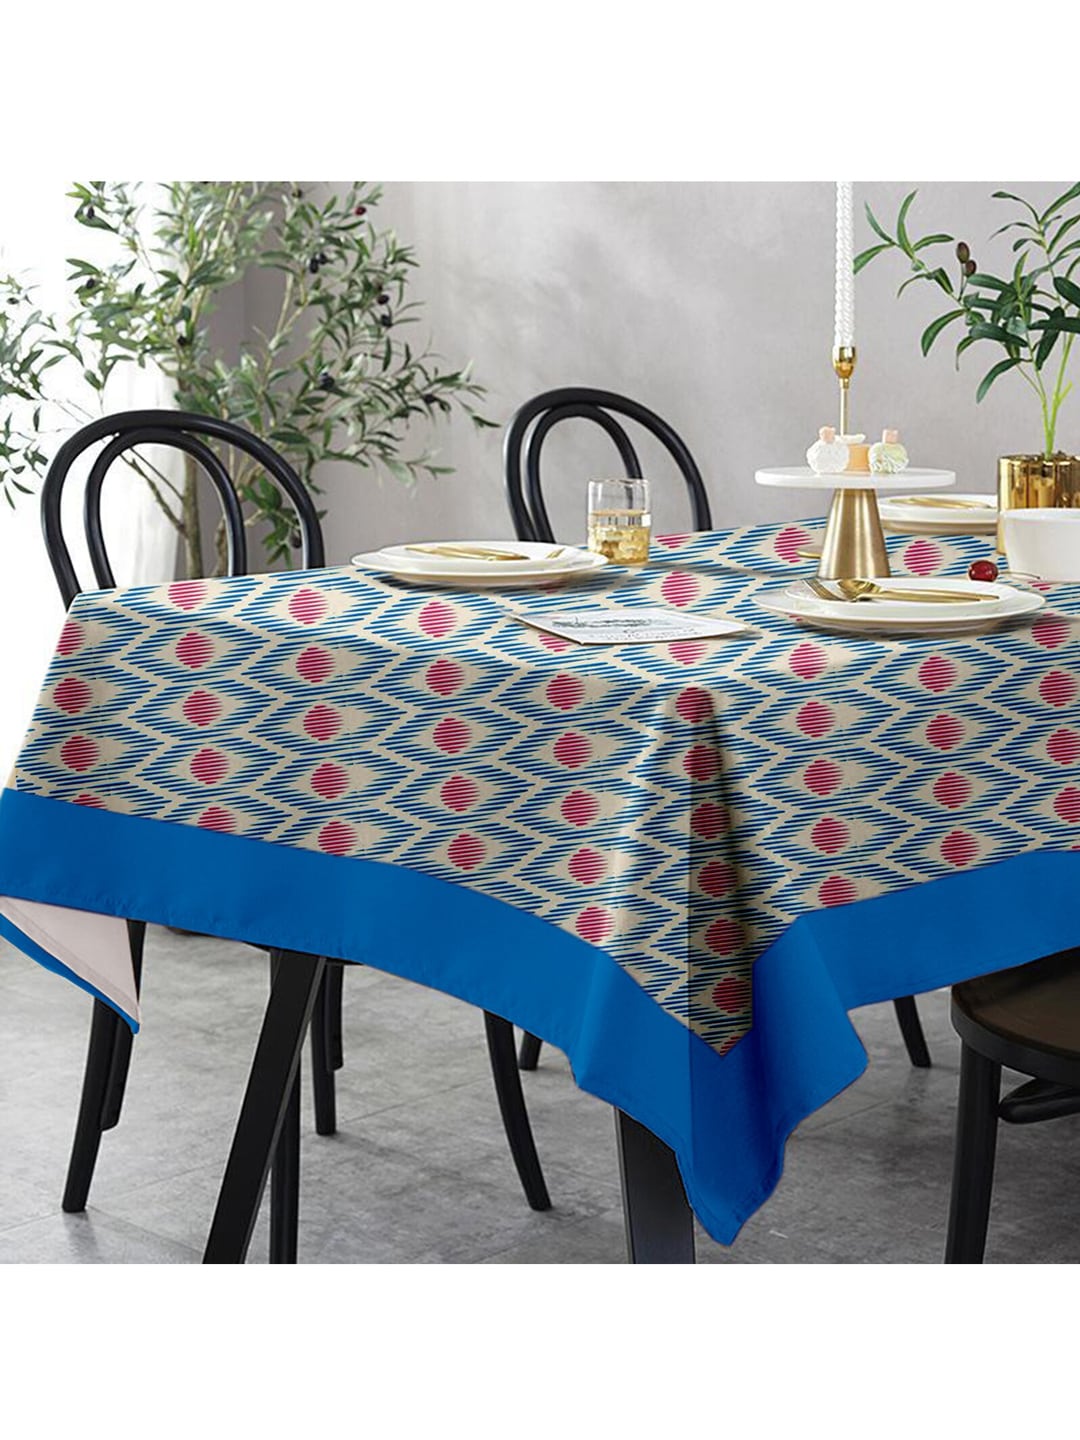 Lushomes Multi 8 Seater Diamond Printed Table Cloth Price in India